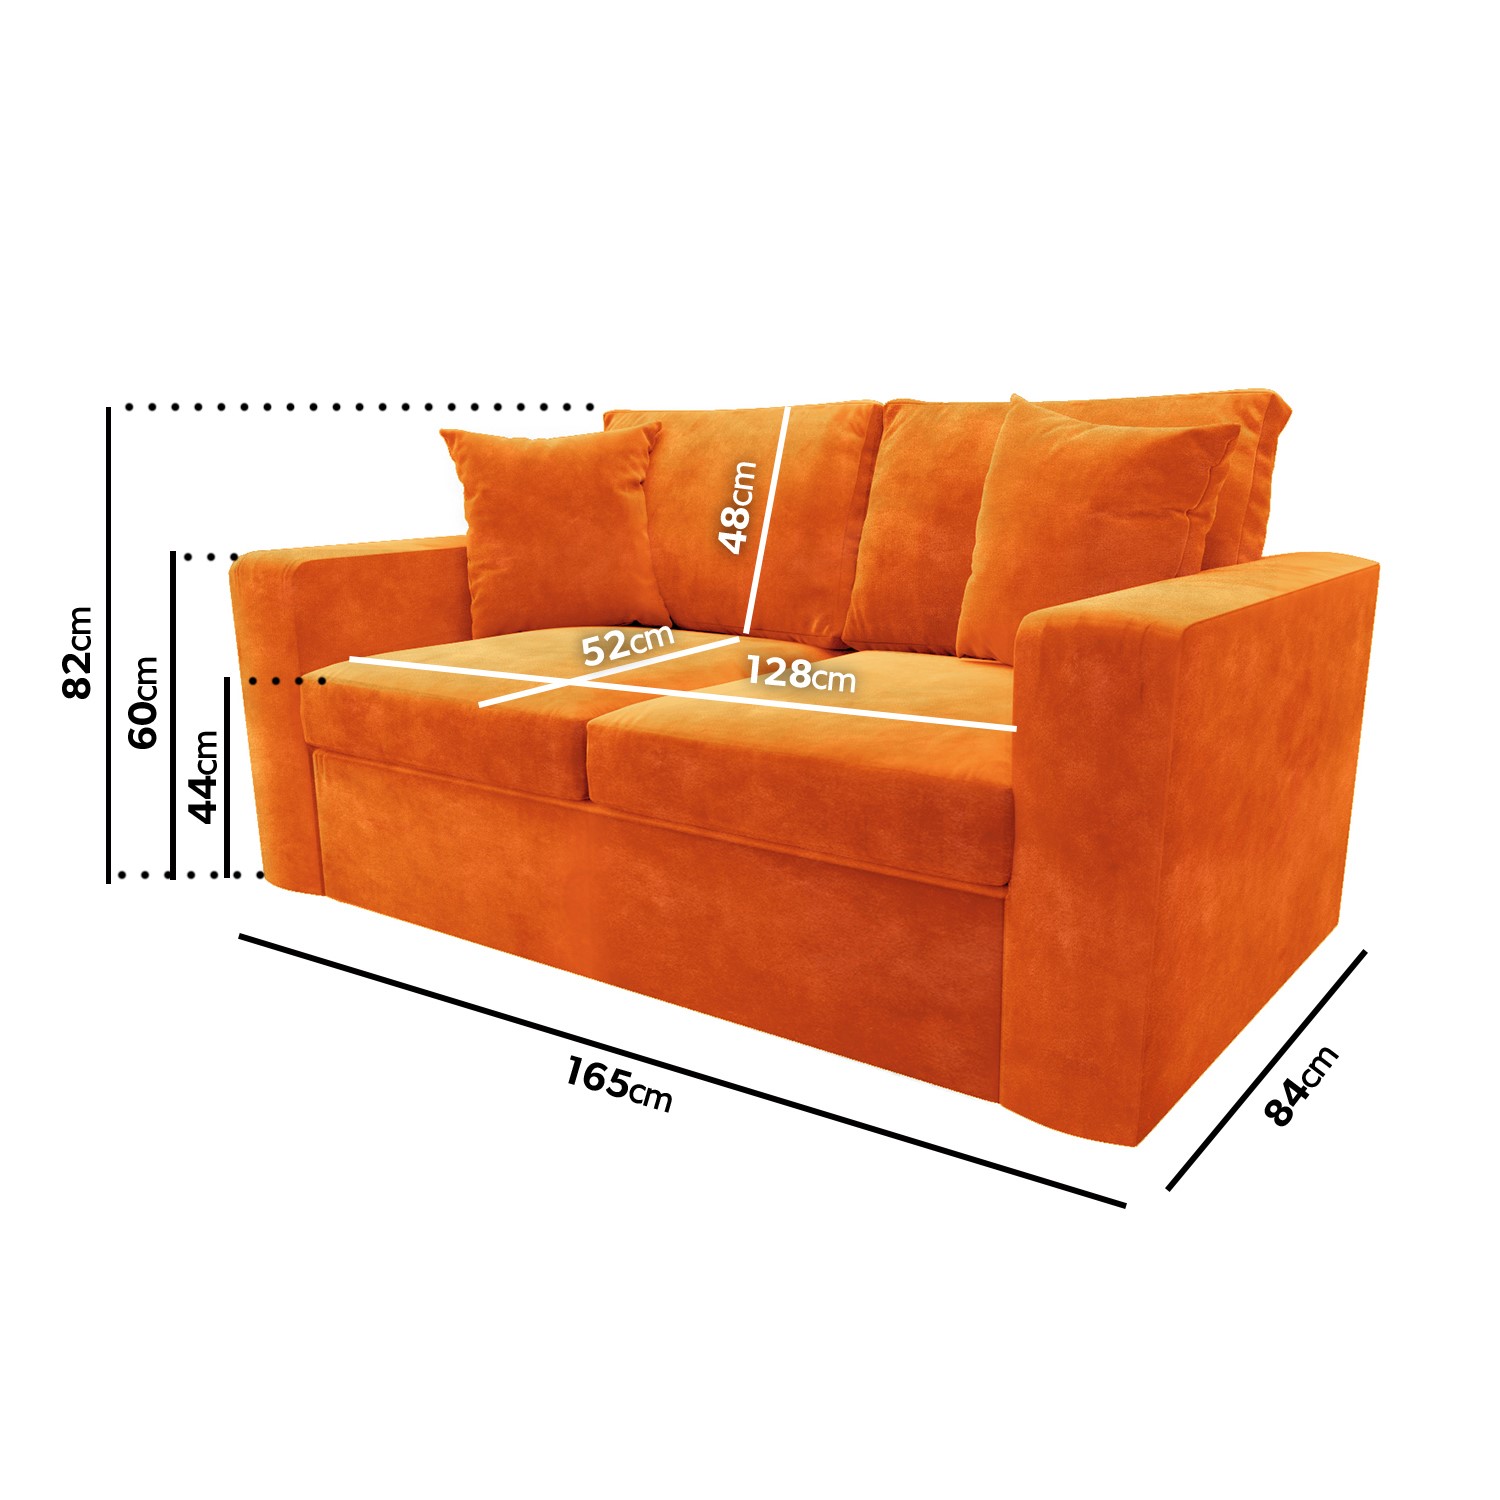 Read more about Orange velvet pull out sofa bed seats 2 layton